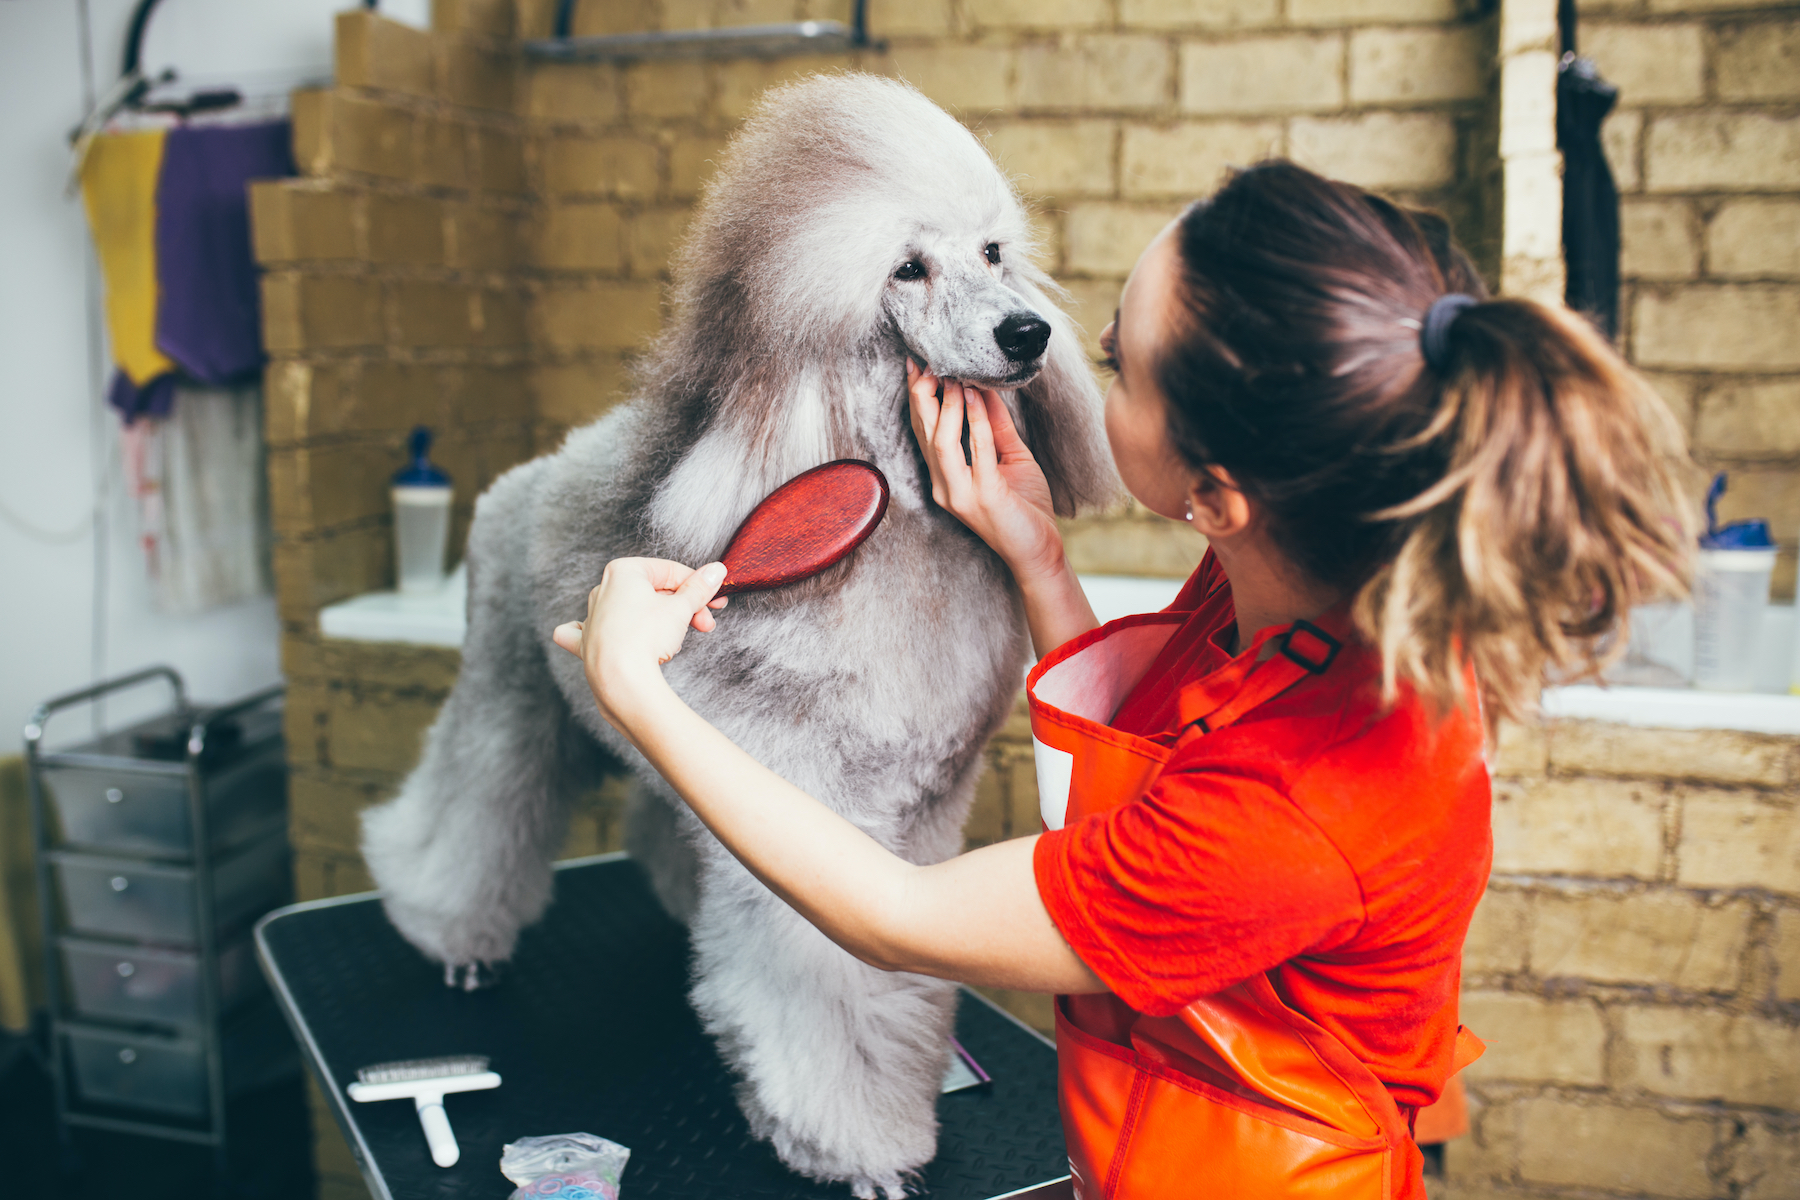 just dogs grooming parlour